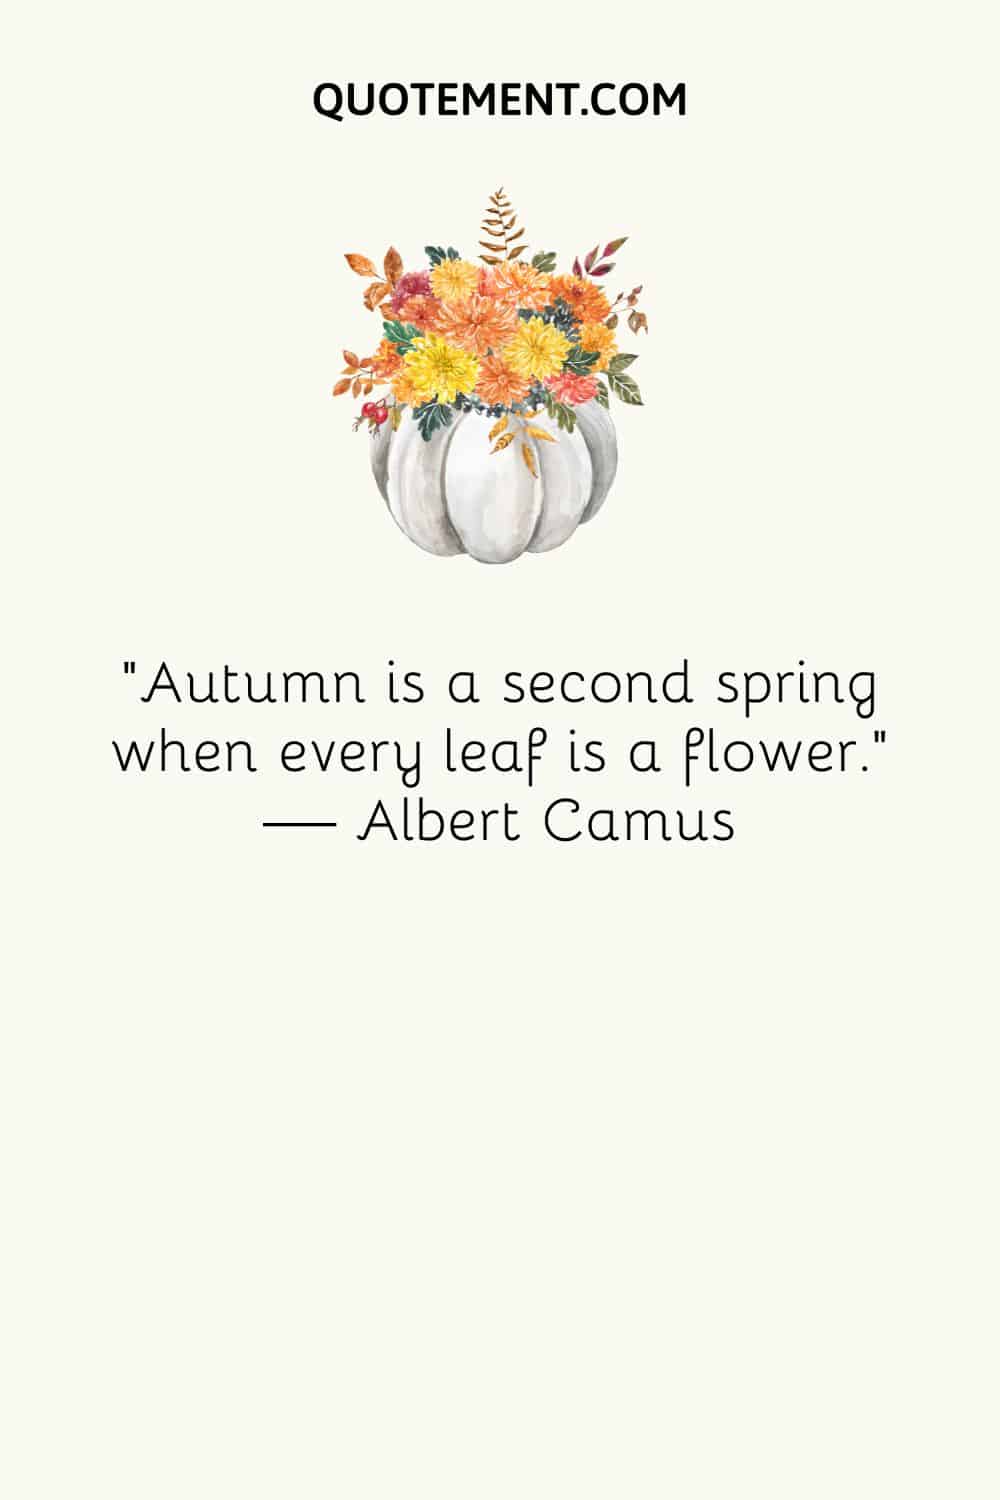 “Autumn is a second spring when every leaf is a flower.” — Albert Camus